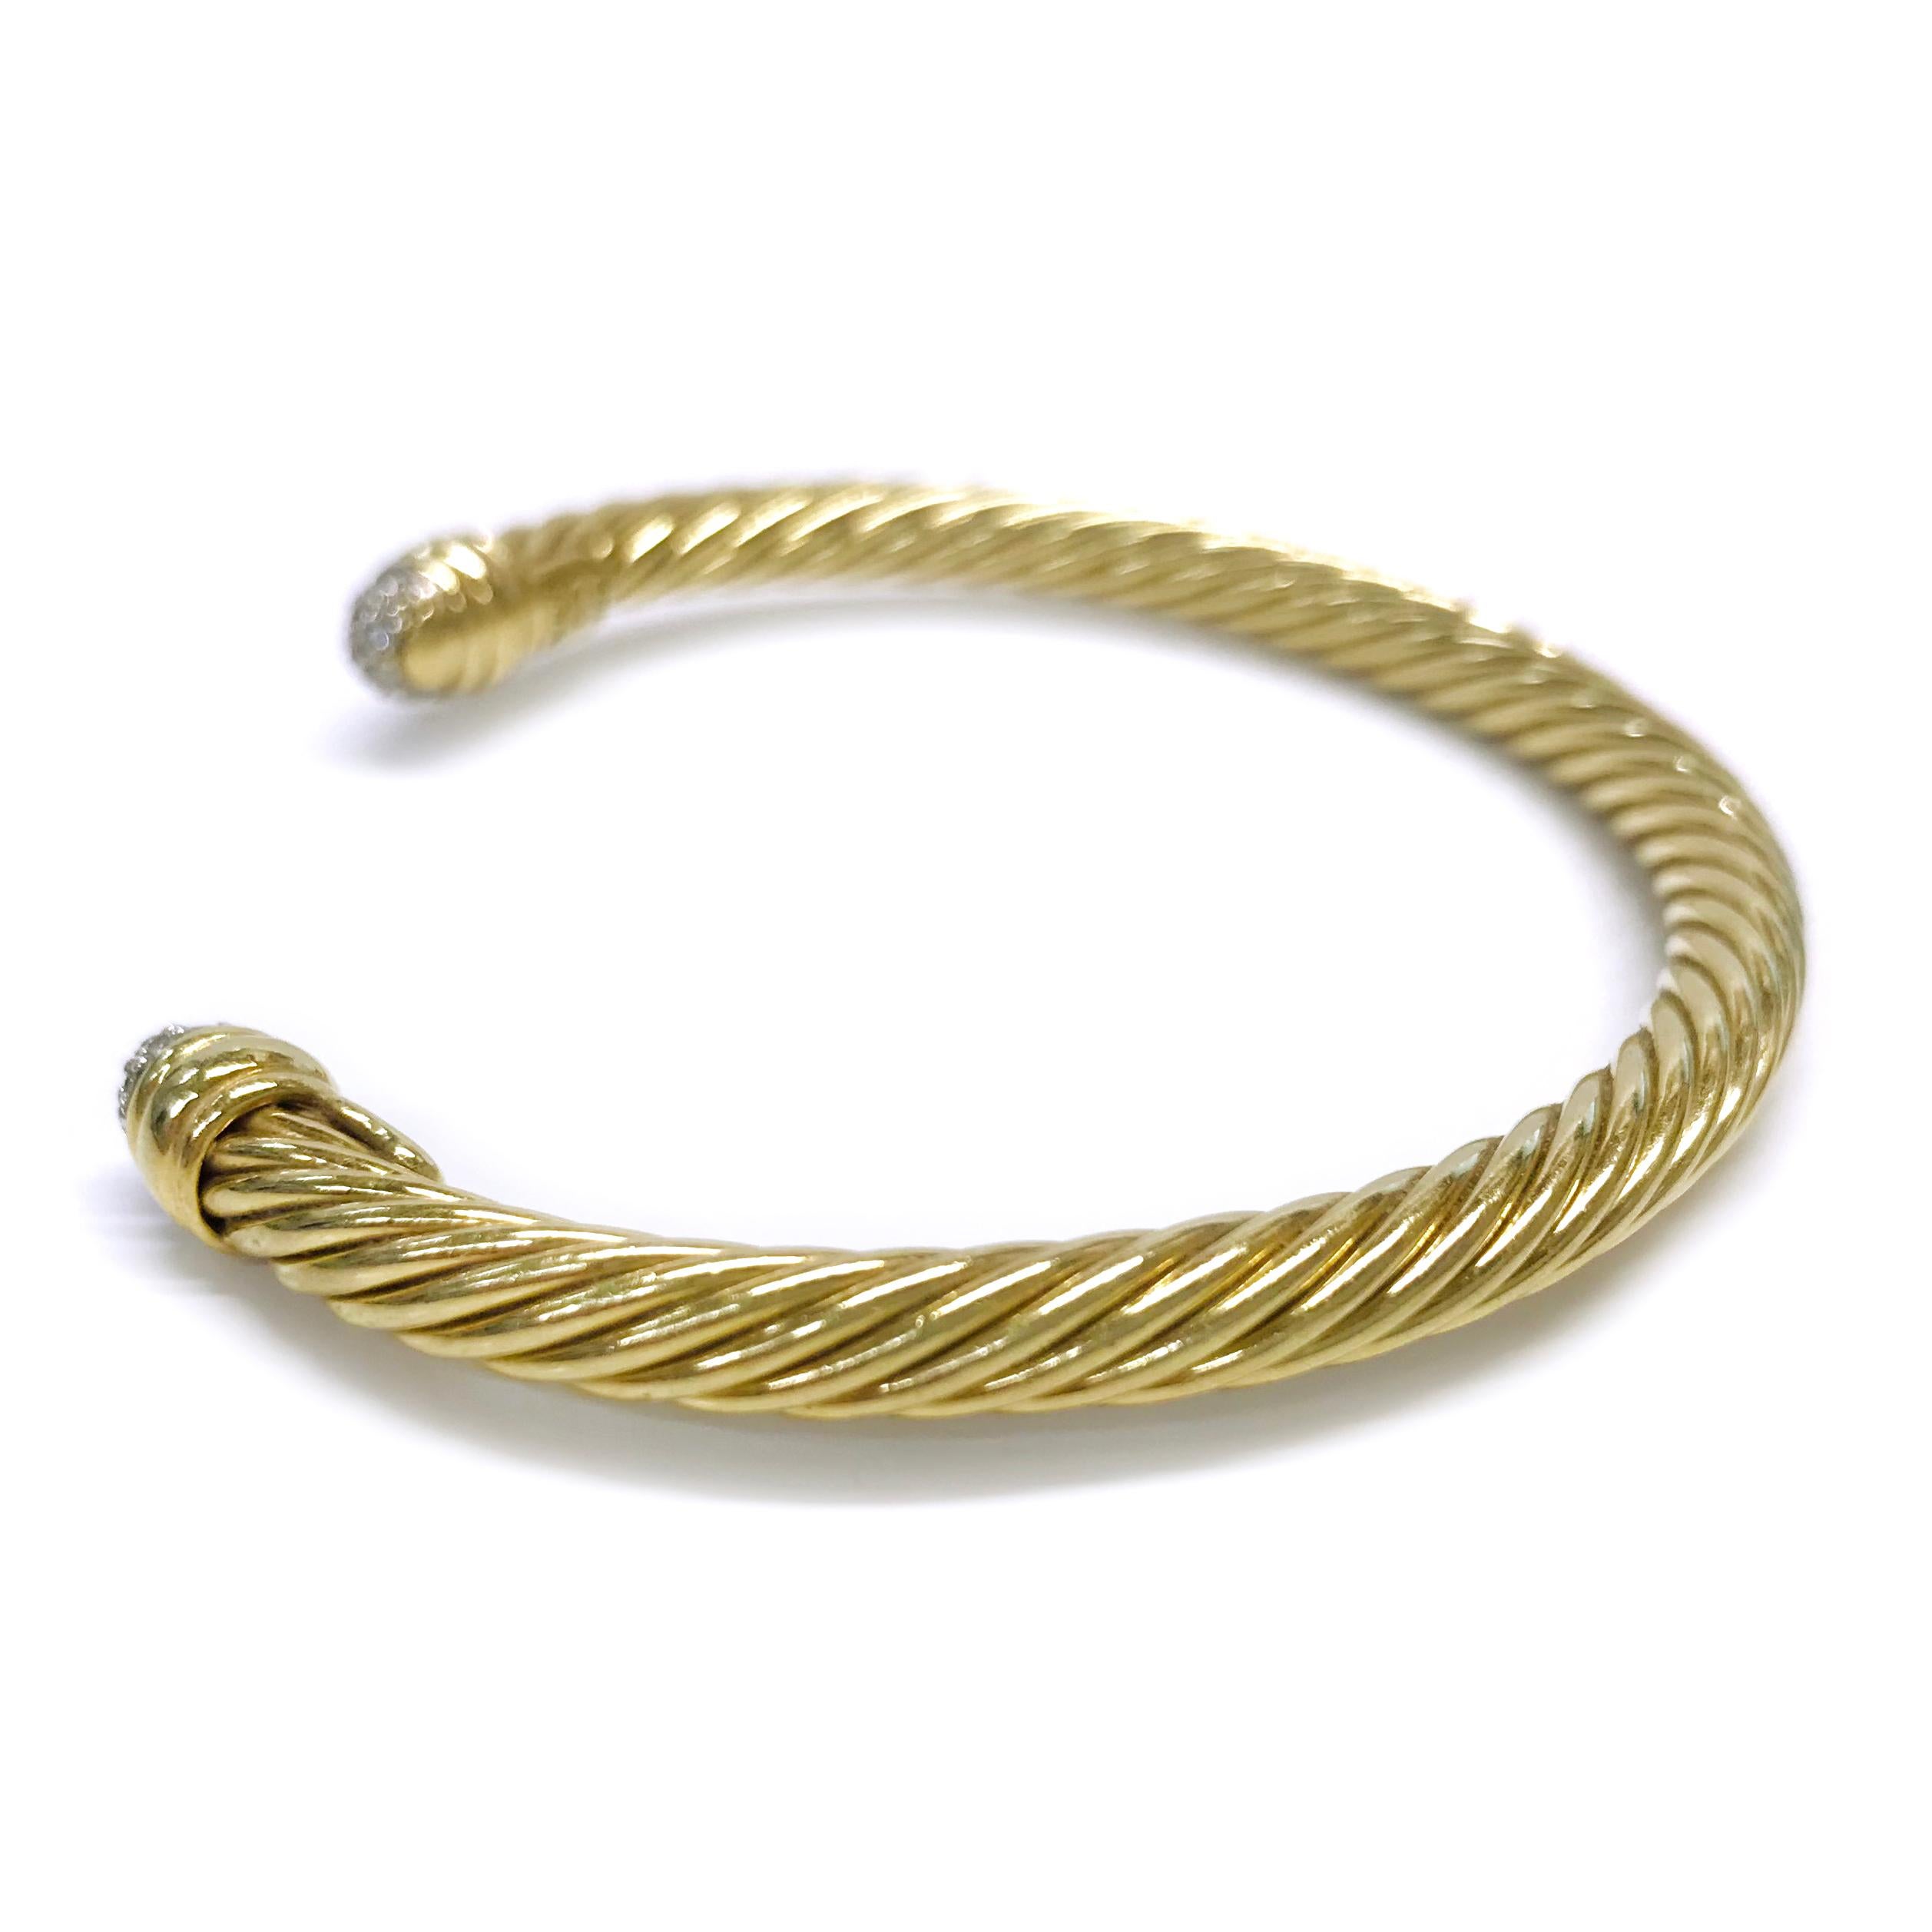 18 Karat Yellow Gold David Yurman Diamond Pave Spira Cable Cuff Bracelet. The classic cable design element creates movement, texture, and depth. The ends of the cuff feature a dome shape with eleven round pave-set diamonds in white gold on each end.